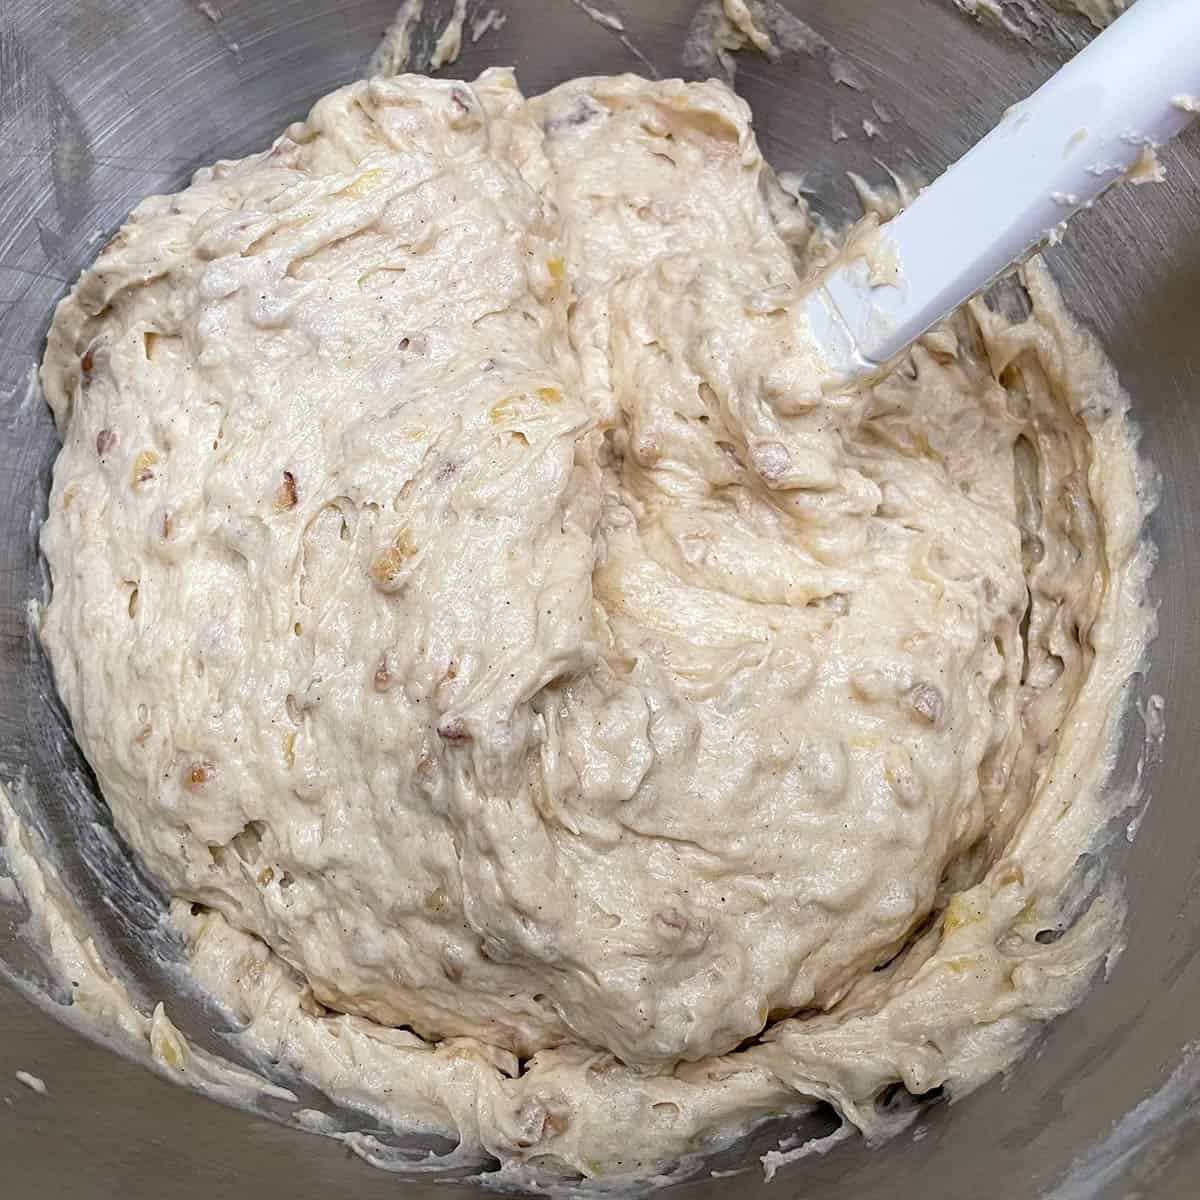 Banana Bread cookie dough all mixed up in the mixer bowl.